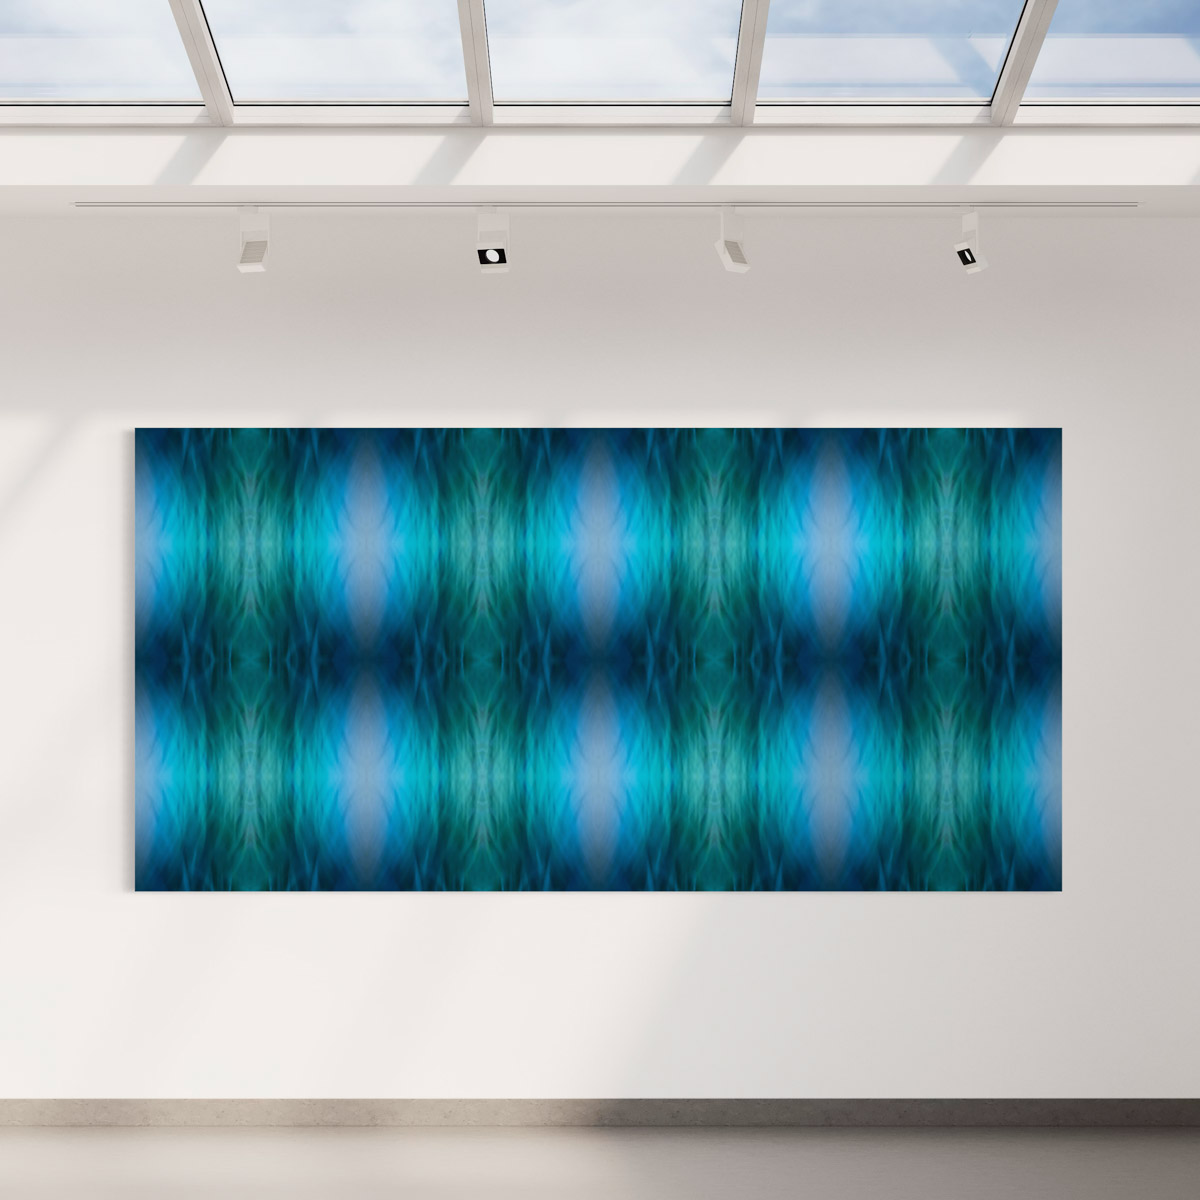 A large painting of blue and green abstract designs.